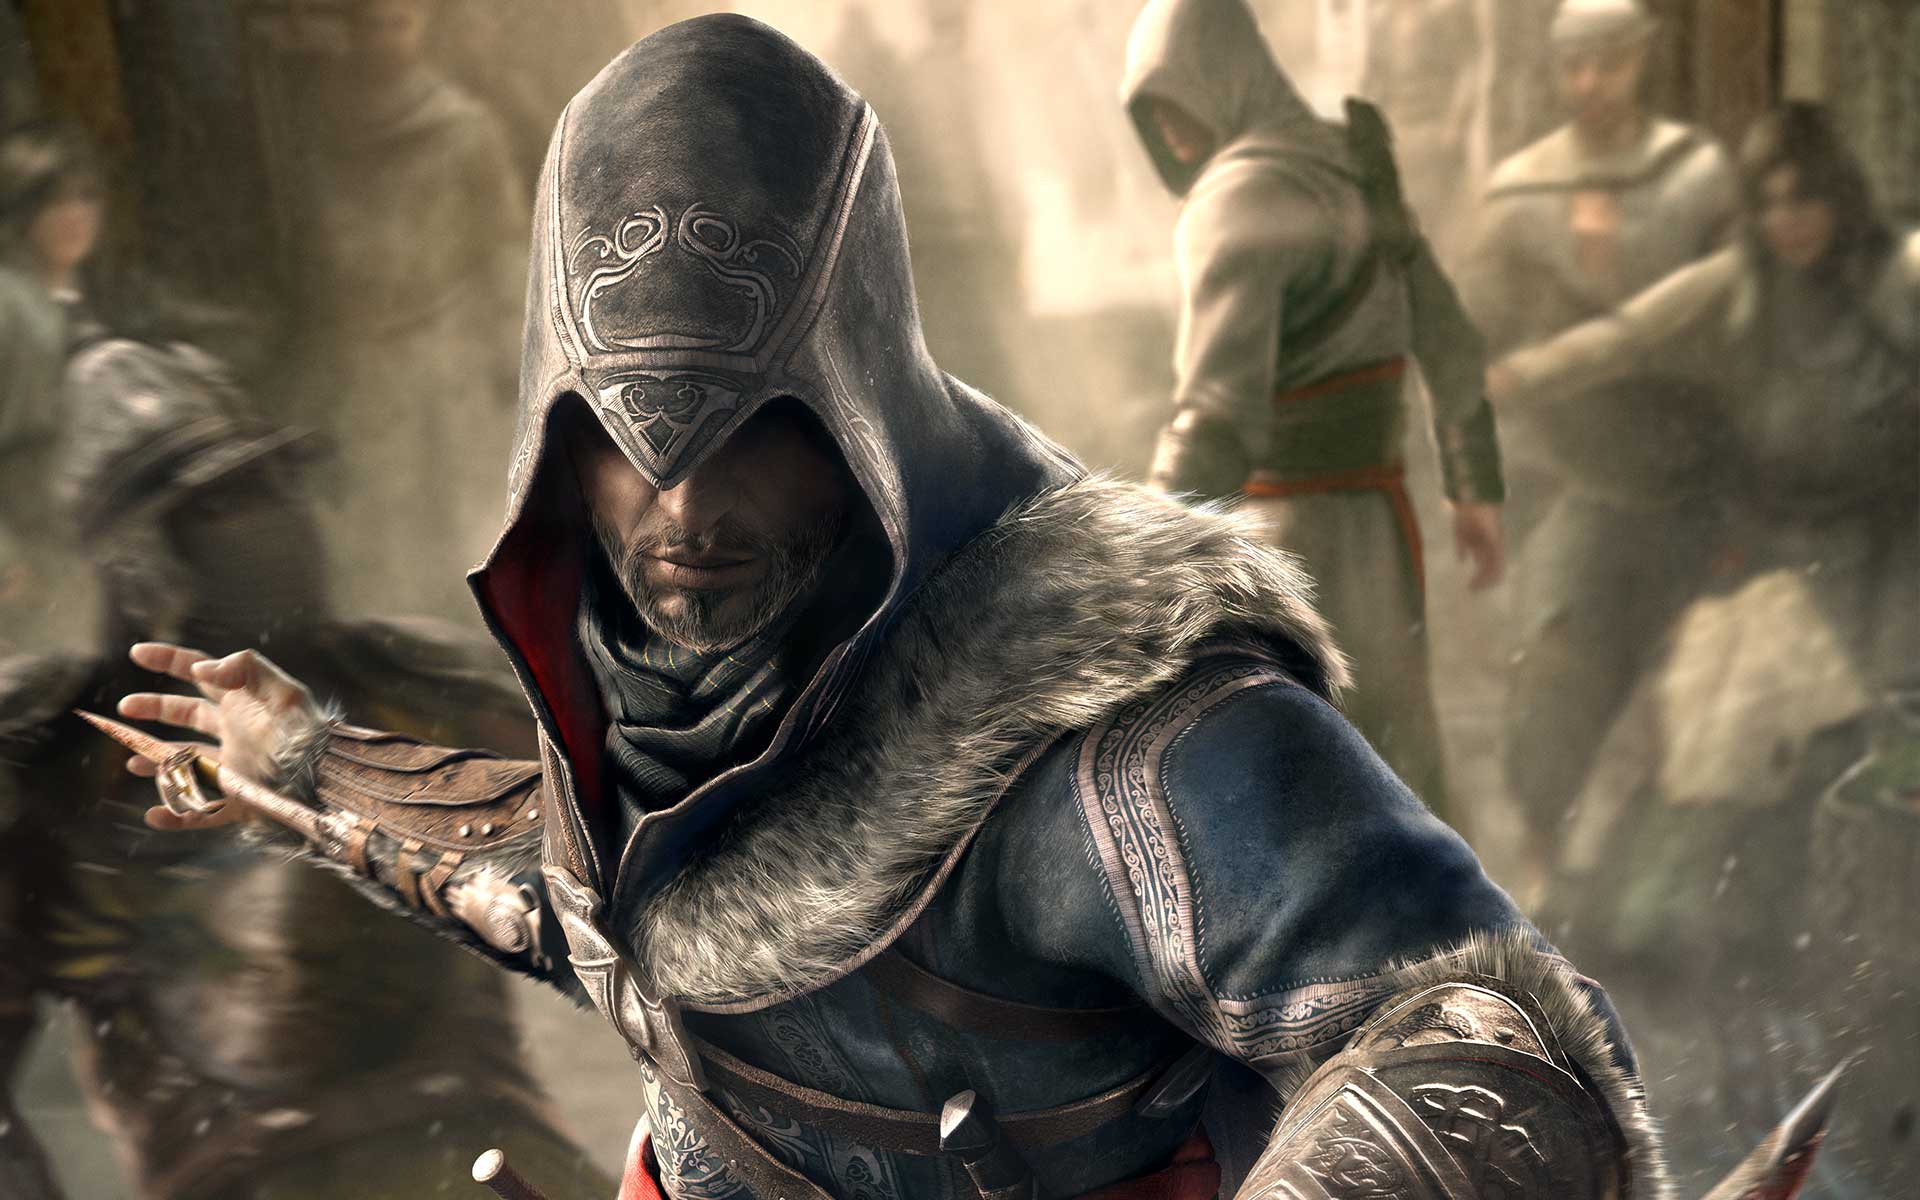 Ezio wields a hidden blade while the ghost of Altair walks behind him in key art for Assassin’s Creed Revelations.